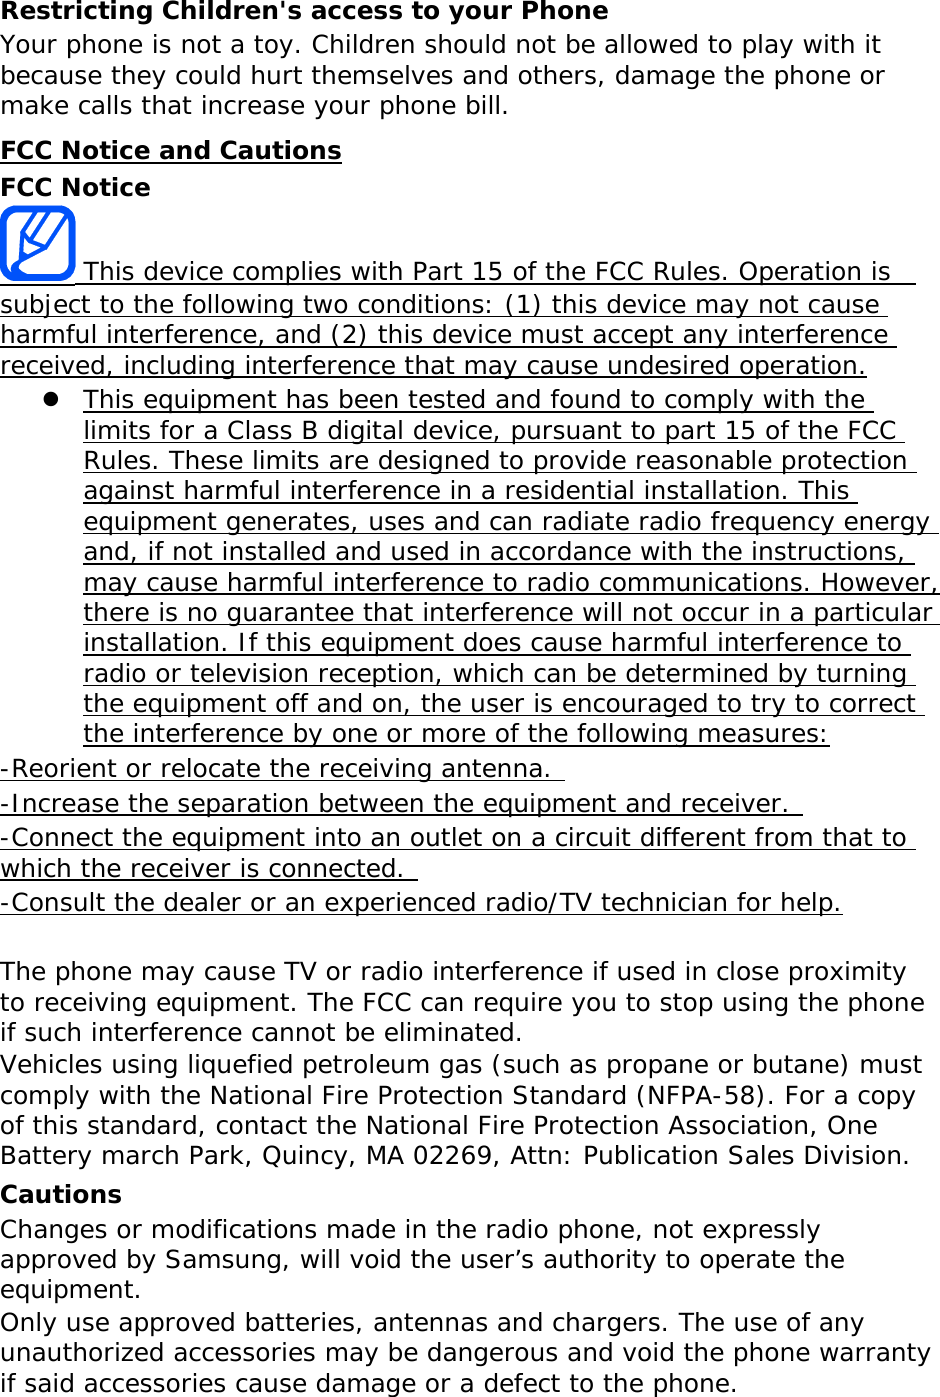 Restricting Children&apos;s access to your Phone Your phone is not a toy. Children should not be allowed to play with it because they could hurt themselves and others, damage the phone or make calls that increase your phone bill. FCC Notice and Cautions FCC Notice  This device complies with Part 15 of the FCC Rules. Operation is  subject to the following two conditions: (1) this device may not cause harmful interference, and (2) this device must accept any interference received, including interference that may cause undesired operation.  This equipment has been tested and found to comply with the limits for a Class B digital device, pursuant to part 15 of the FCC Rules. These limits are designed to provide reasonable protection against harmful interference in a residential installation. This equipment generates, uses and can radiate radio frequency energy and, if not installed and used in accordance with the instructions, may cause harmful interference to radio communications. However, there is no guarantee that interference will not occur in a particular installation. If this equipment does cause harmful interference to radio or television reception, which can be determined by turning the equipment off and on, the user is encouraged to try to correct the interference by one or more of the following measures: -Reorient or relocate the receiving antenna.  -Increase the separation between the equipment and receiver.  -Connect the equipment into an outlet on a circuit different from that to which the receiver is connected.  -Consult the dealer or an experienced radio/TV technician for help.  The phone may cause TV or radio interference if used in close proximity to receiving equipment. The FCC can require you to stop using the phone if such interference cannot be eliminated. Vehicles using liquefied petroleum gas (such as propane or butane) must comply with the National Fire Protection Standard (NFPA-58). For a copy of this standard, contact the National Fire Protection Association, One Battery march Park, Quincy, MA 02269, Attn: Publication Sales Division. Cautions Changes or modifications made in the radio phone, not expressly approved by Samsung, will void the user’s authority to operate the equipment. Only use approved batteries, antennas and chargers. The use of any unauthorized accessories may be dangerous and void the phone warranty if said accessories cause damage or a defect to the phone. 